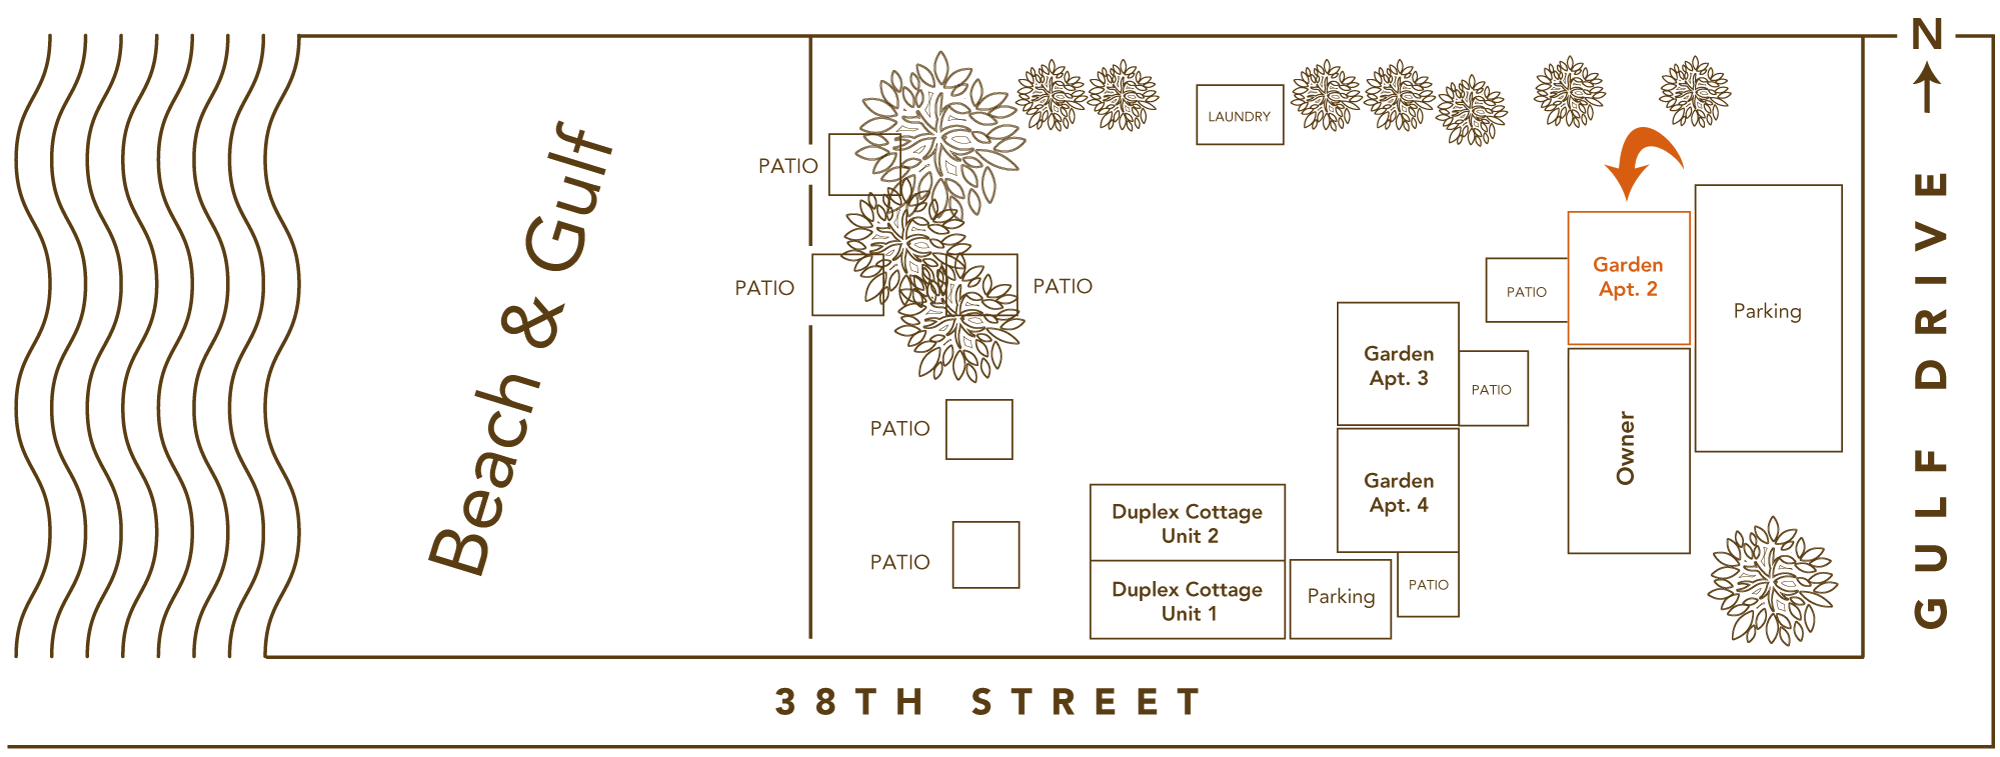 Bamboo Apartments Site Plan